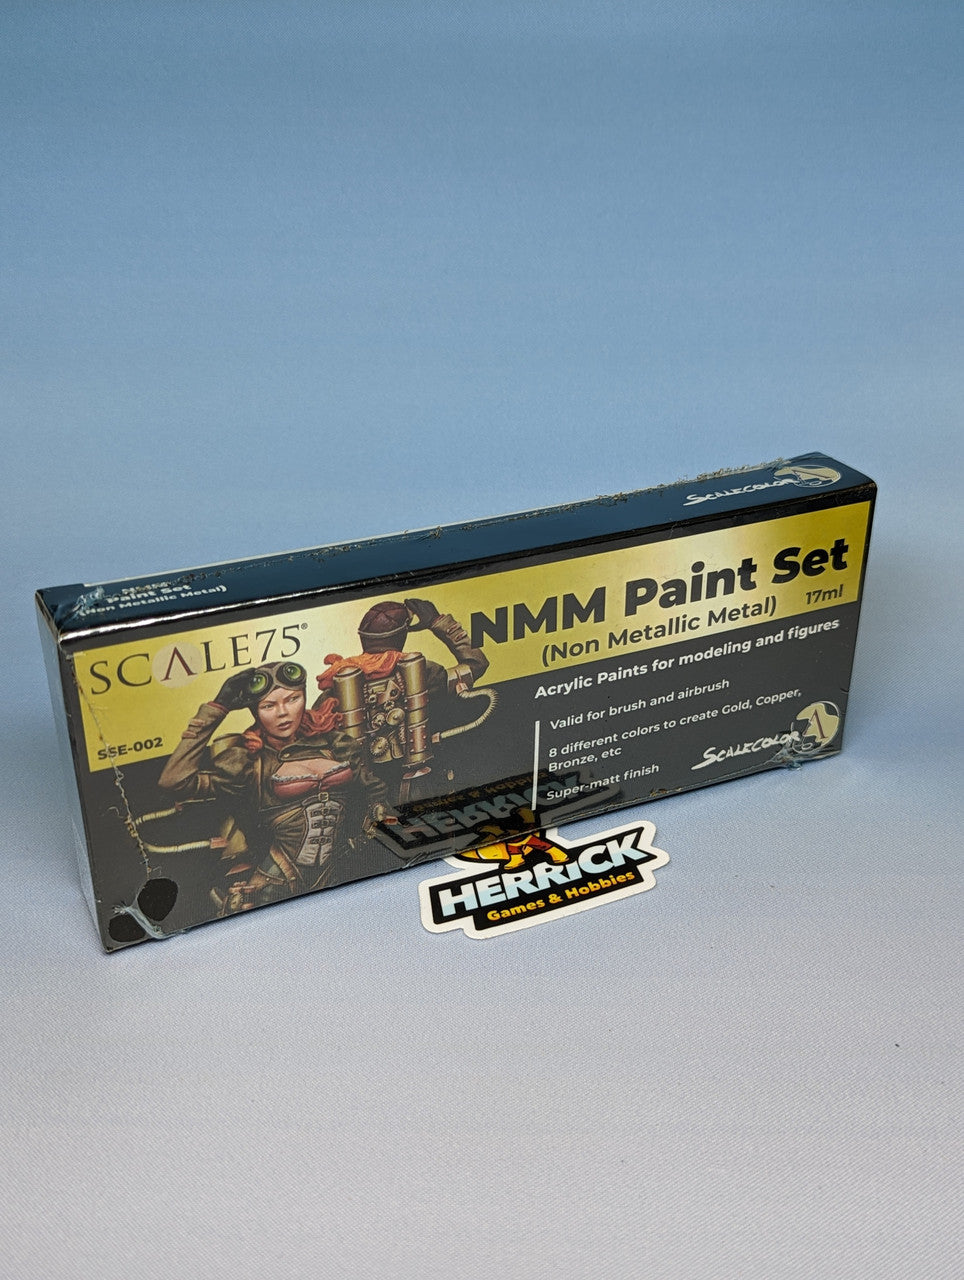 Scale75: NMM Gold and Copper Paint Set